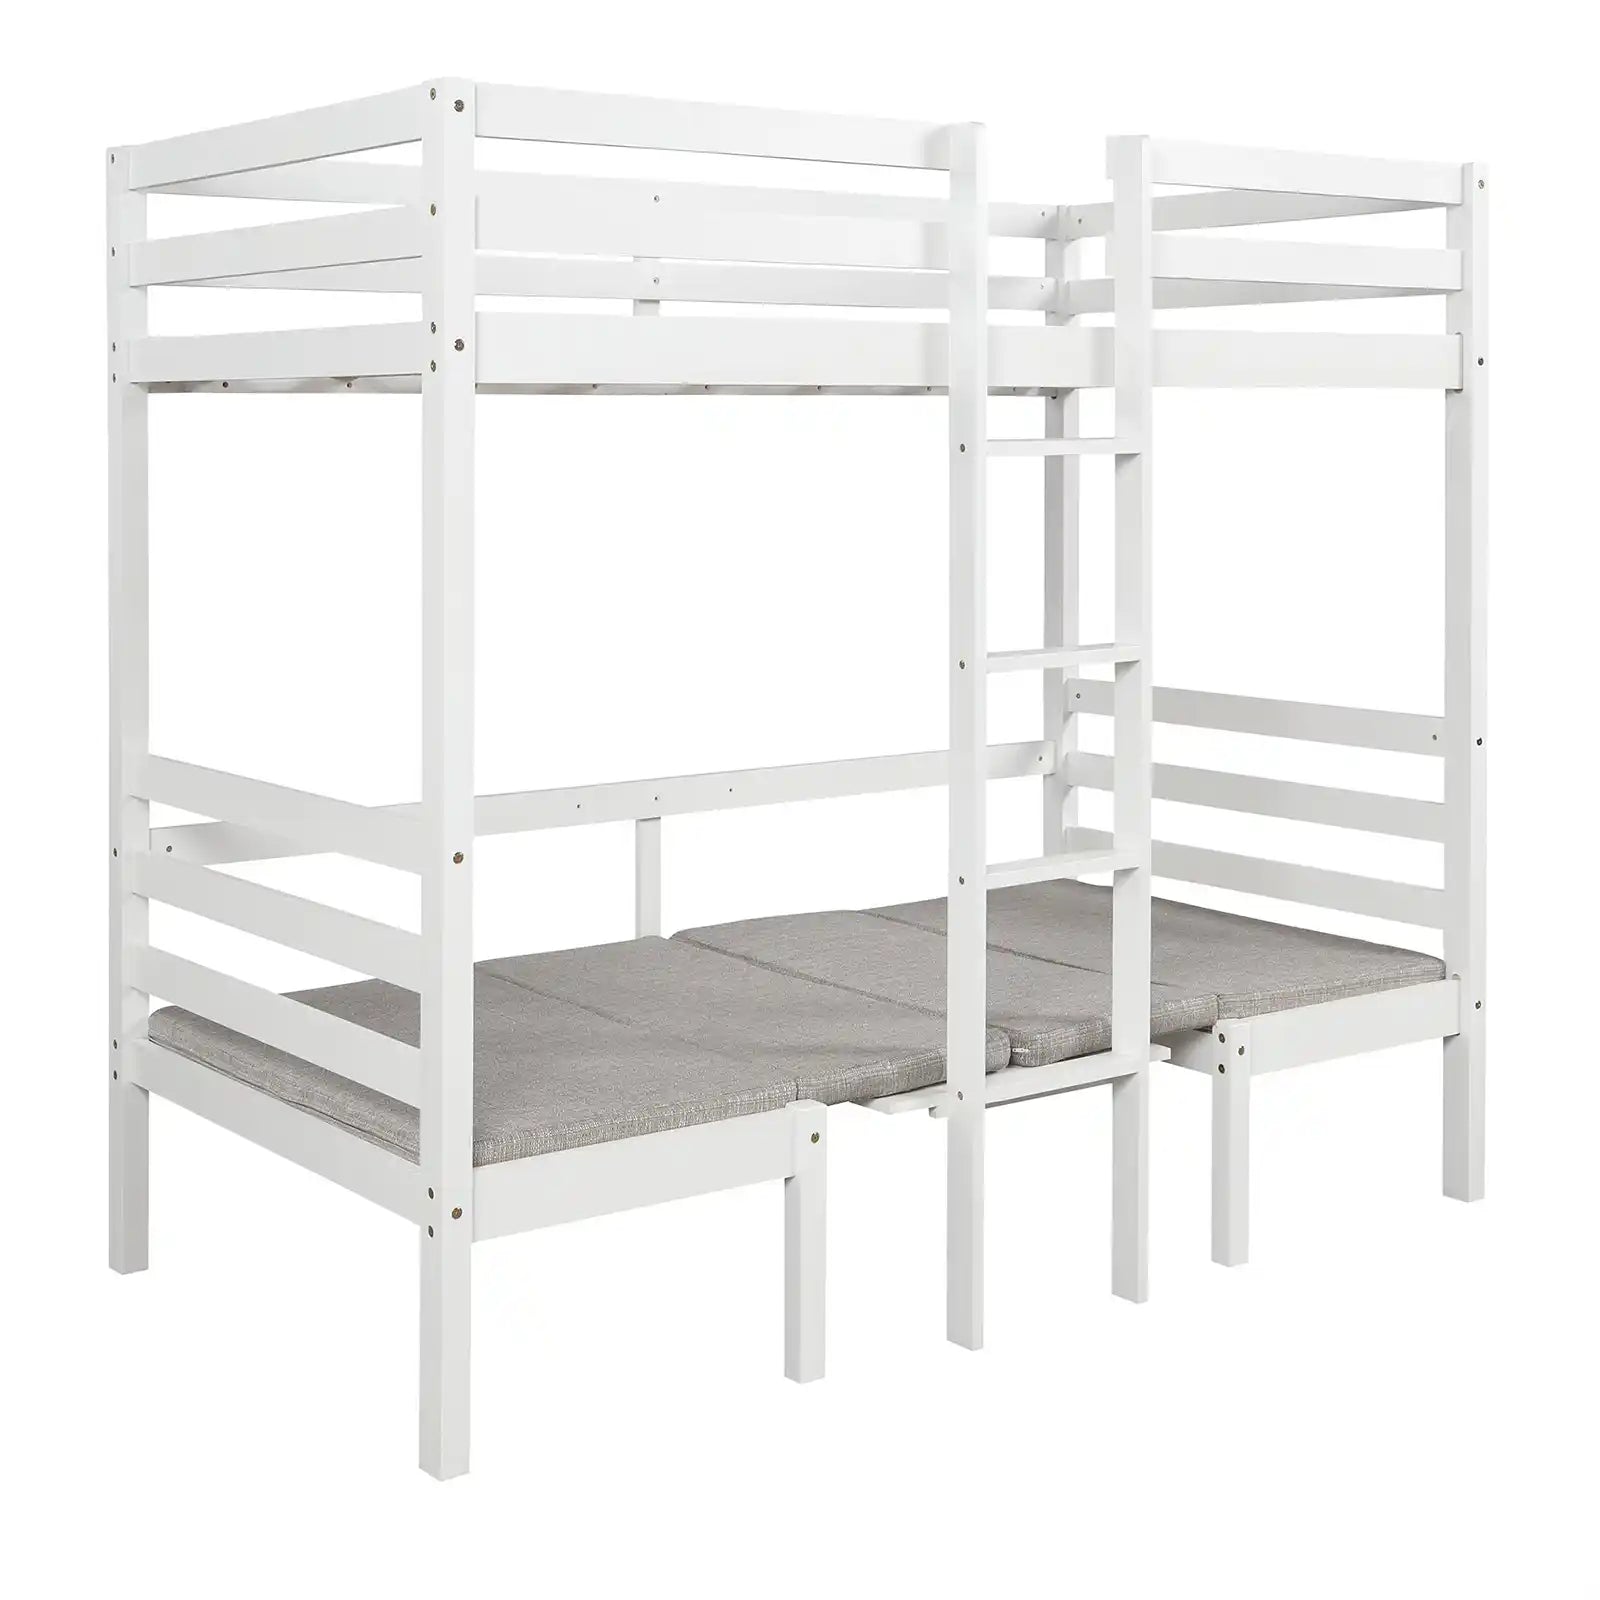 Solid Wood Convertible Twin Bunk Bed for Child Room